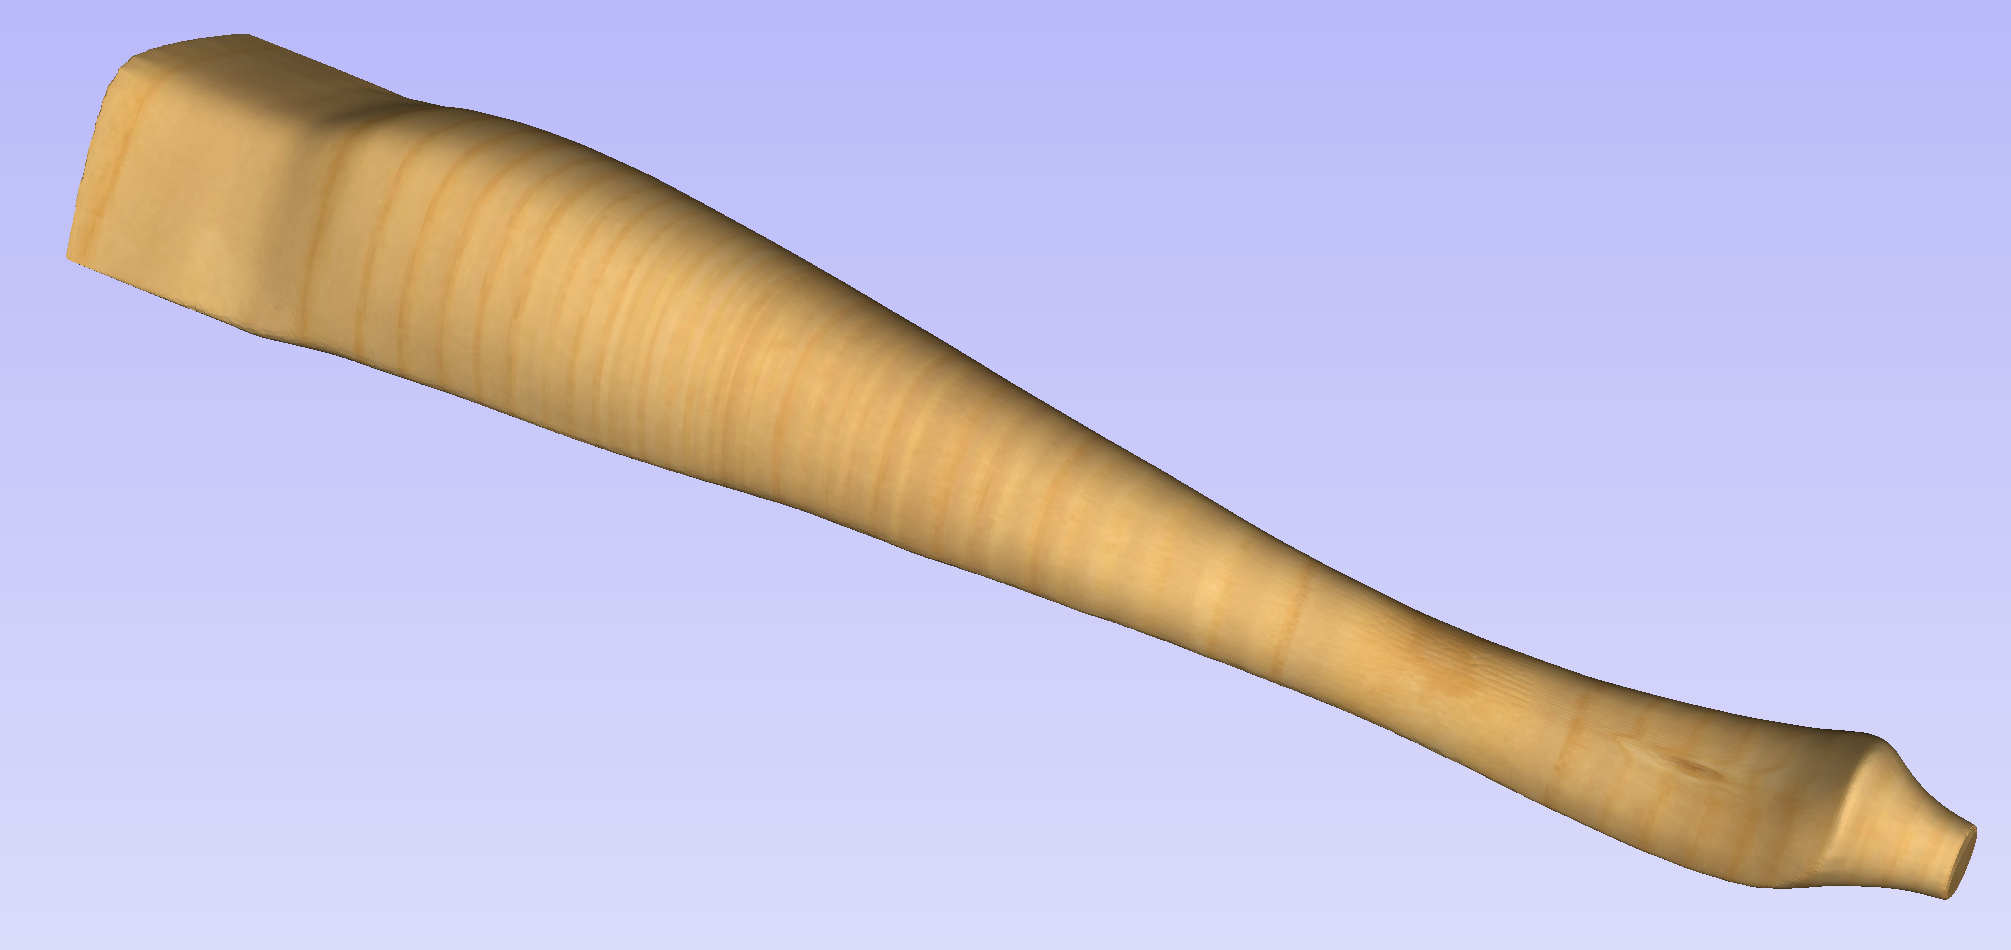 A table leg imported from STL file